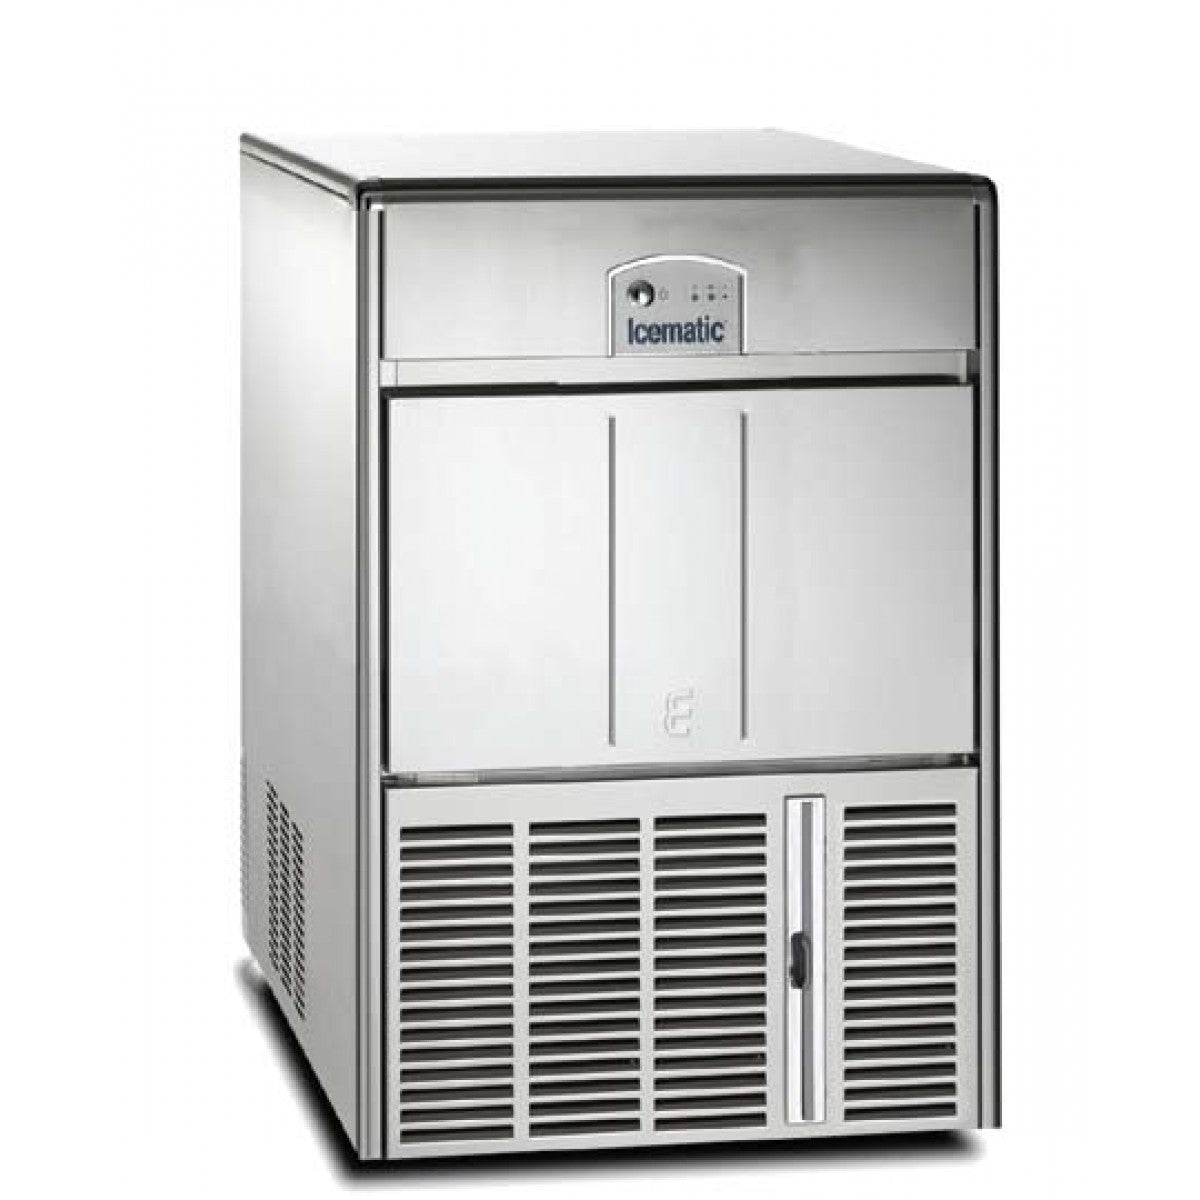 ICEMATIC E-Series Ice Maker - 10kg Ice Machines ICEMATIC   